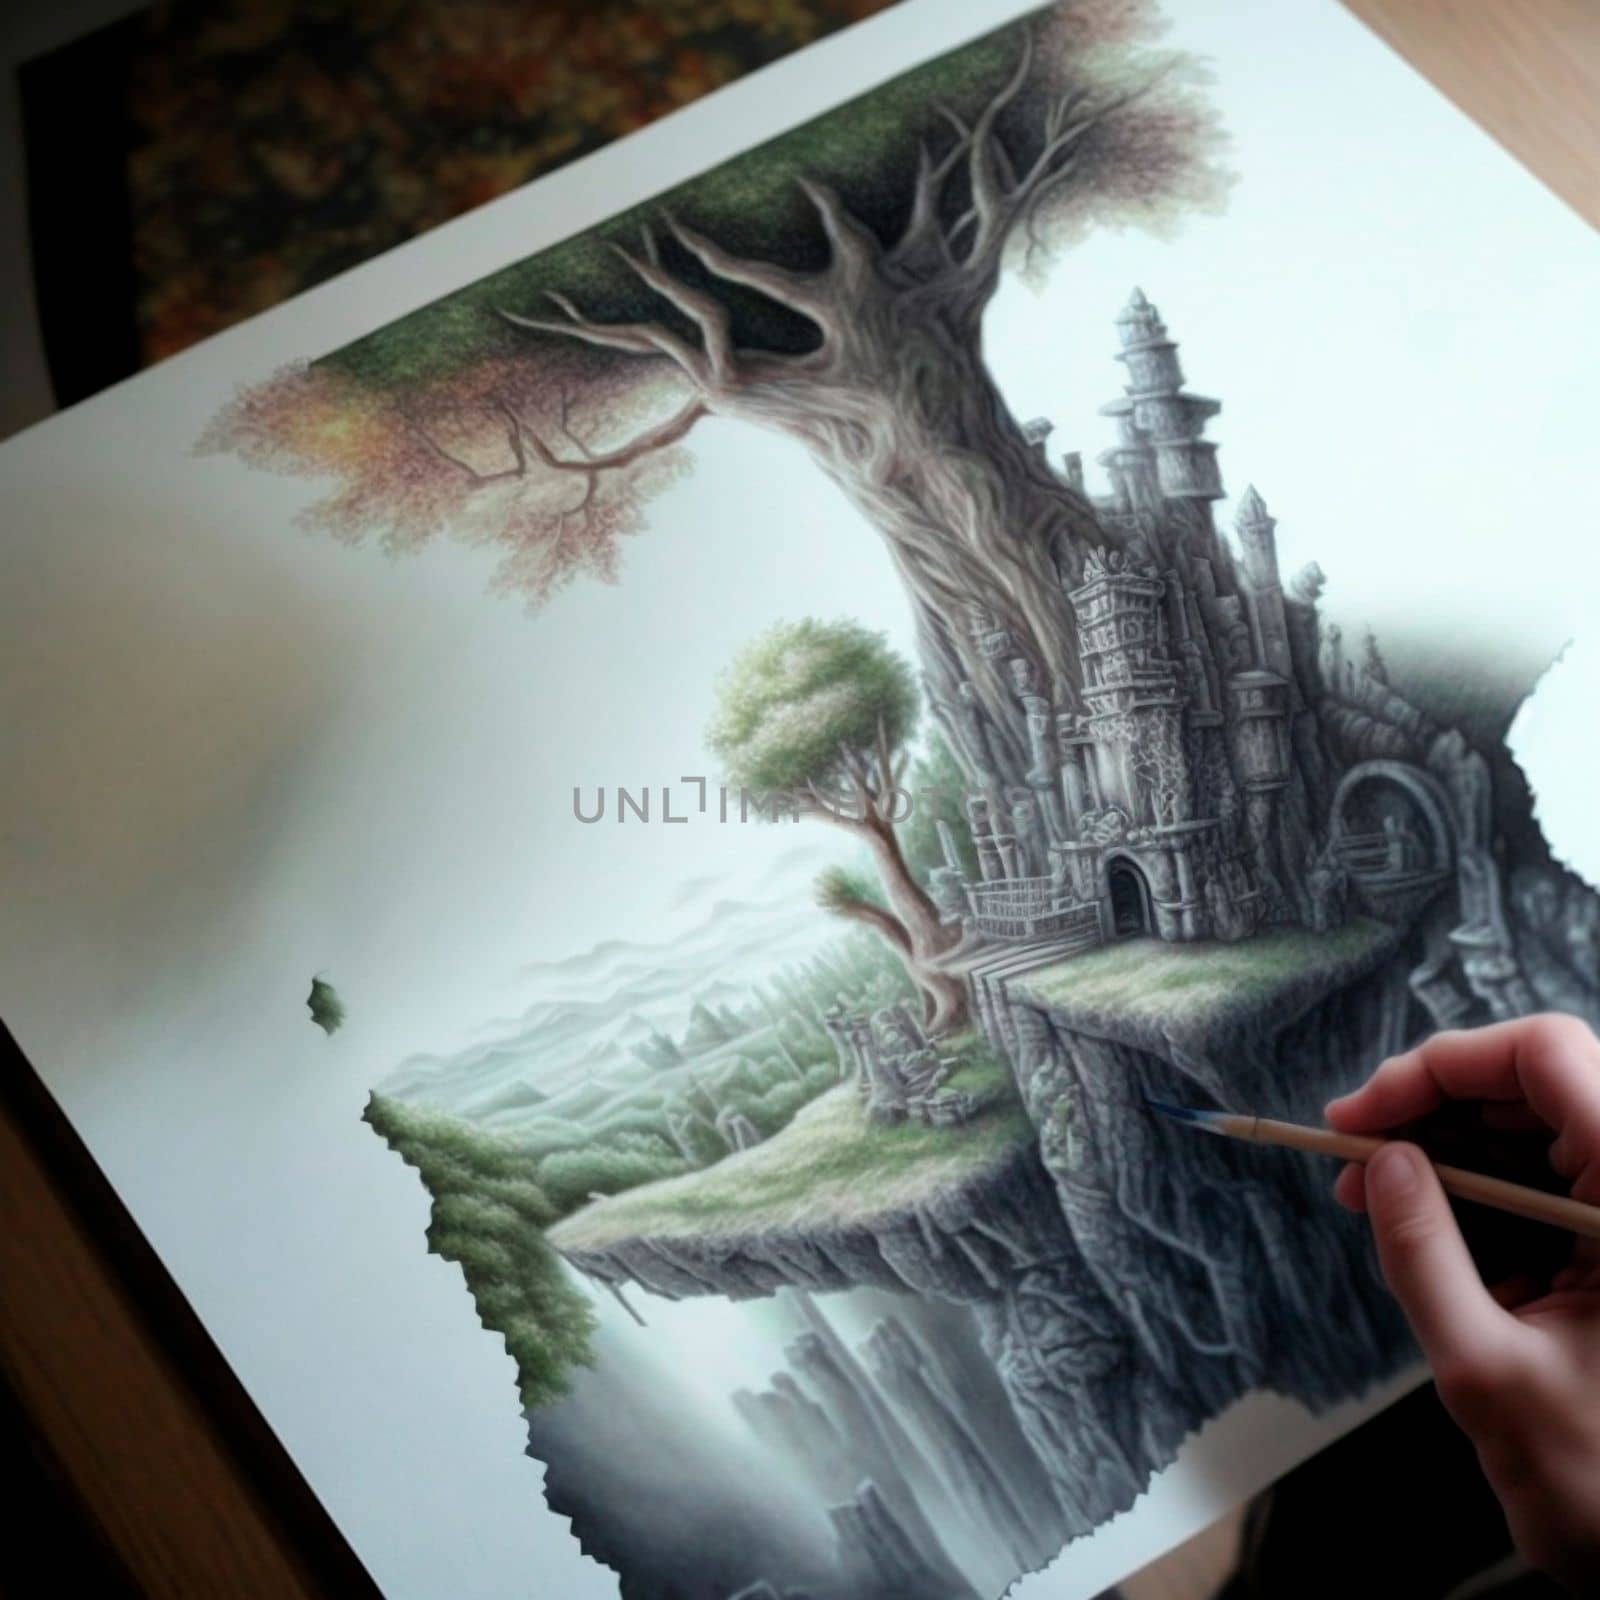 Illustration of the fantasy world on a piece of paper. High quality illustration